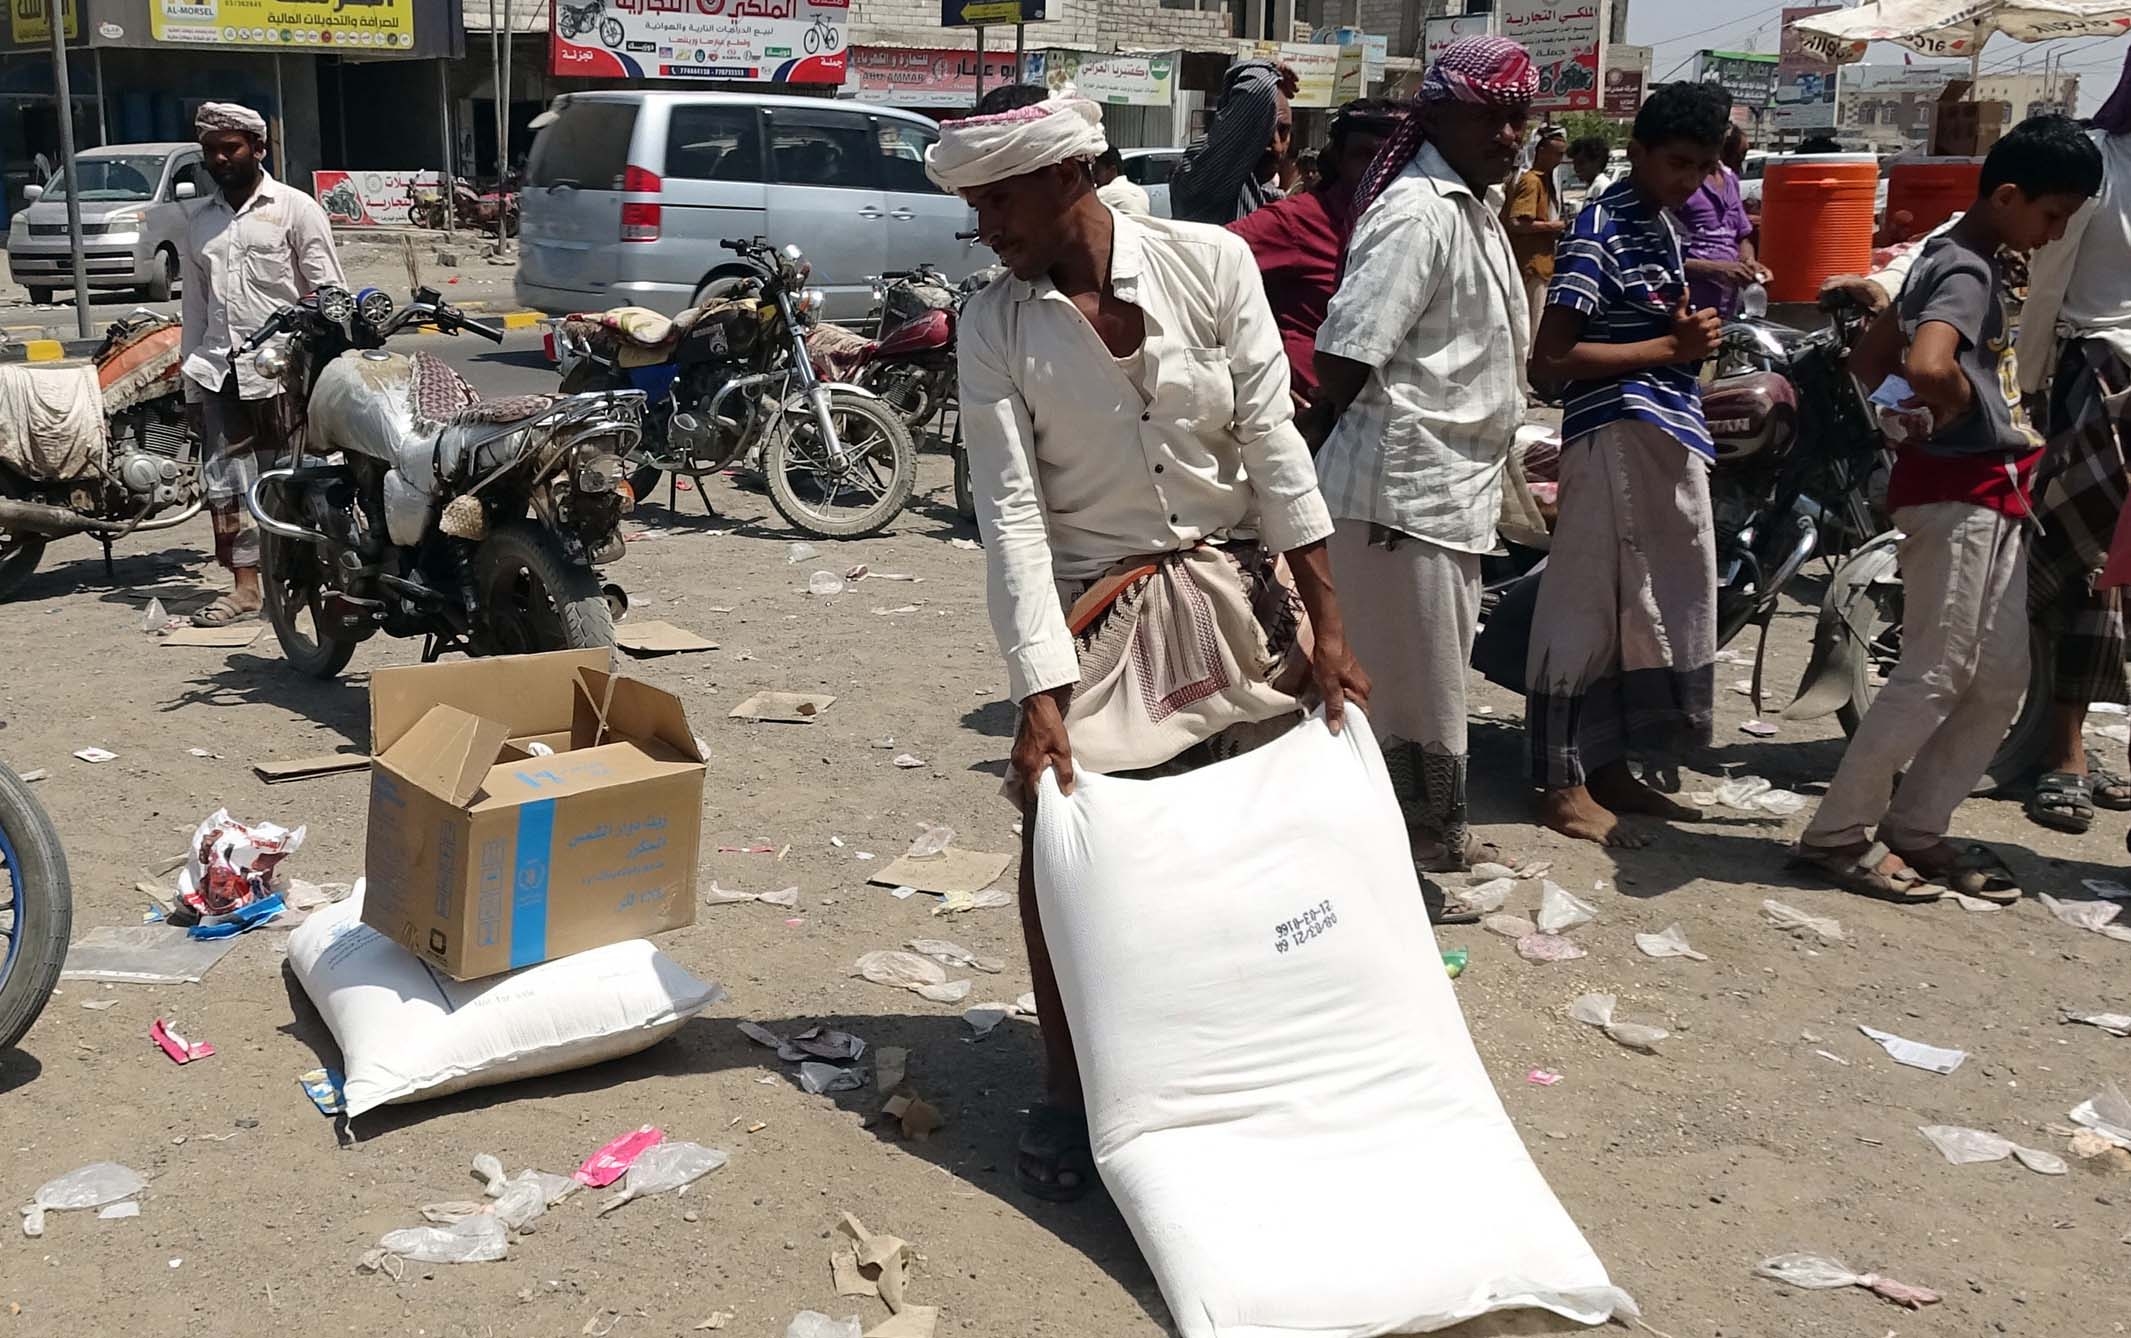 UN data shows that food imports through the ports of Hodeidah and Saleef dropped from 483,000 tonnes a month to 268,000 tonnes in February.